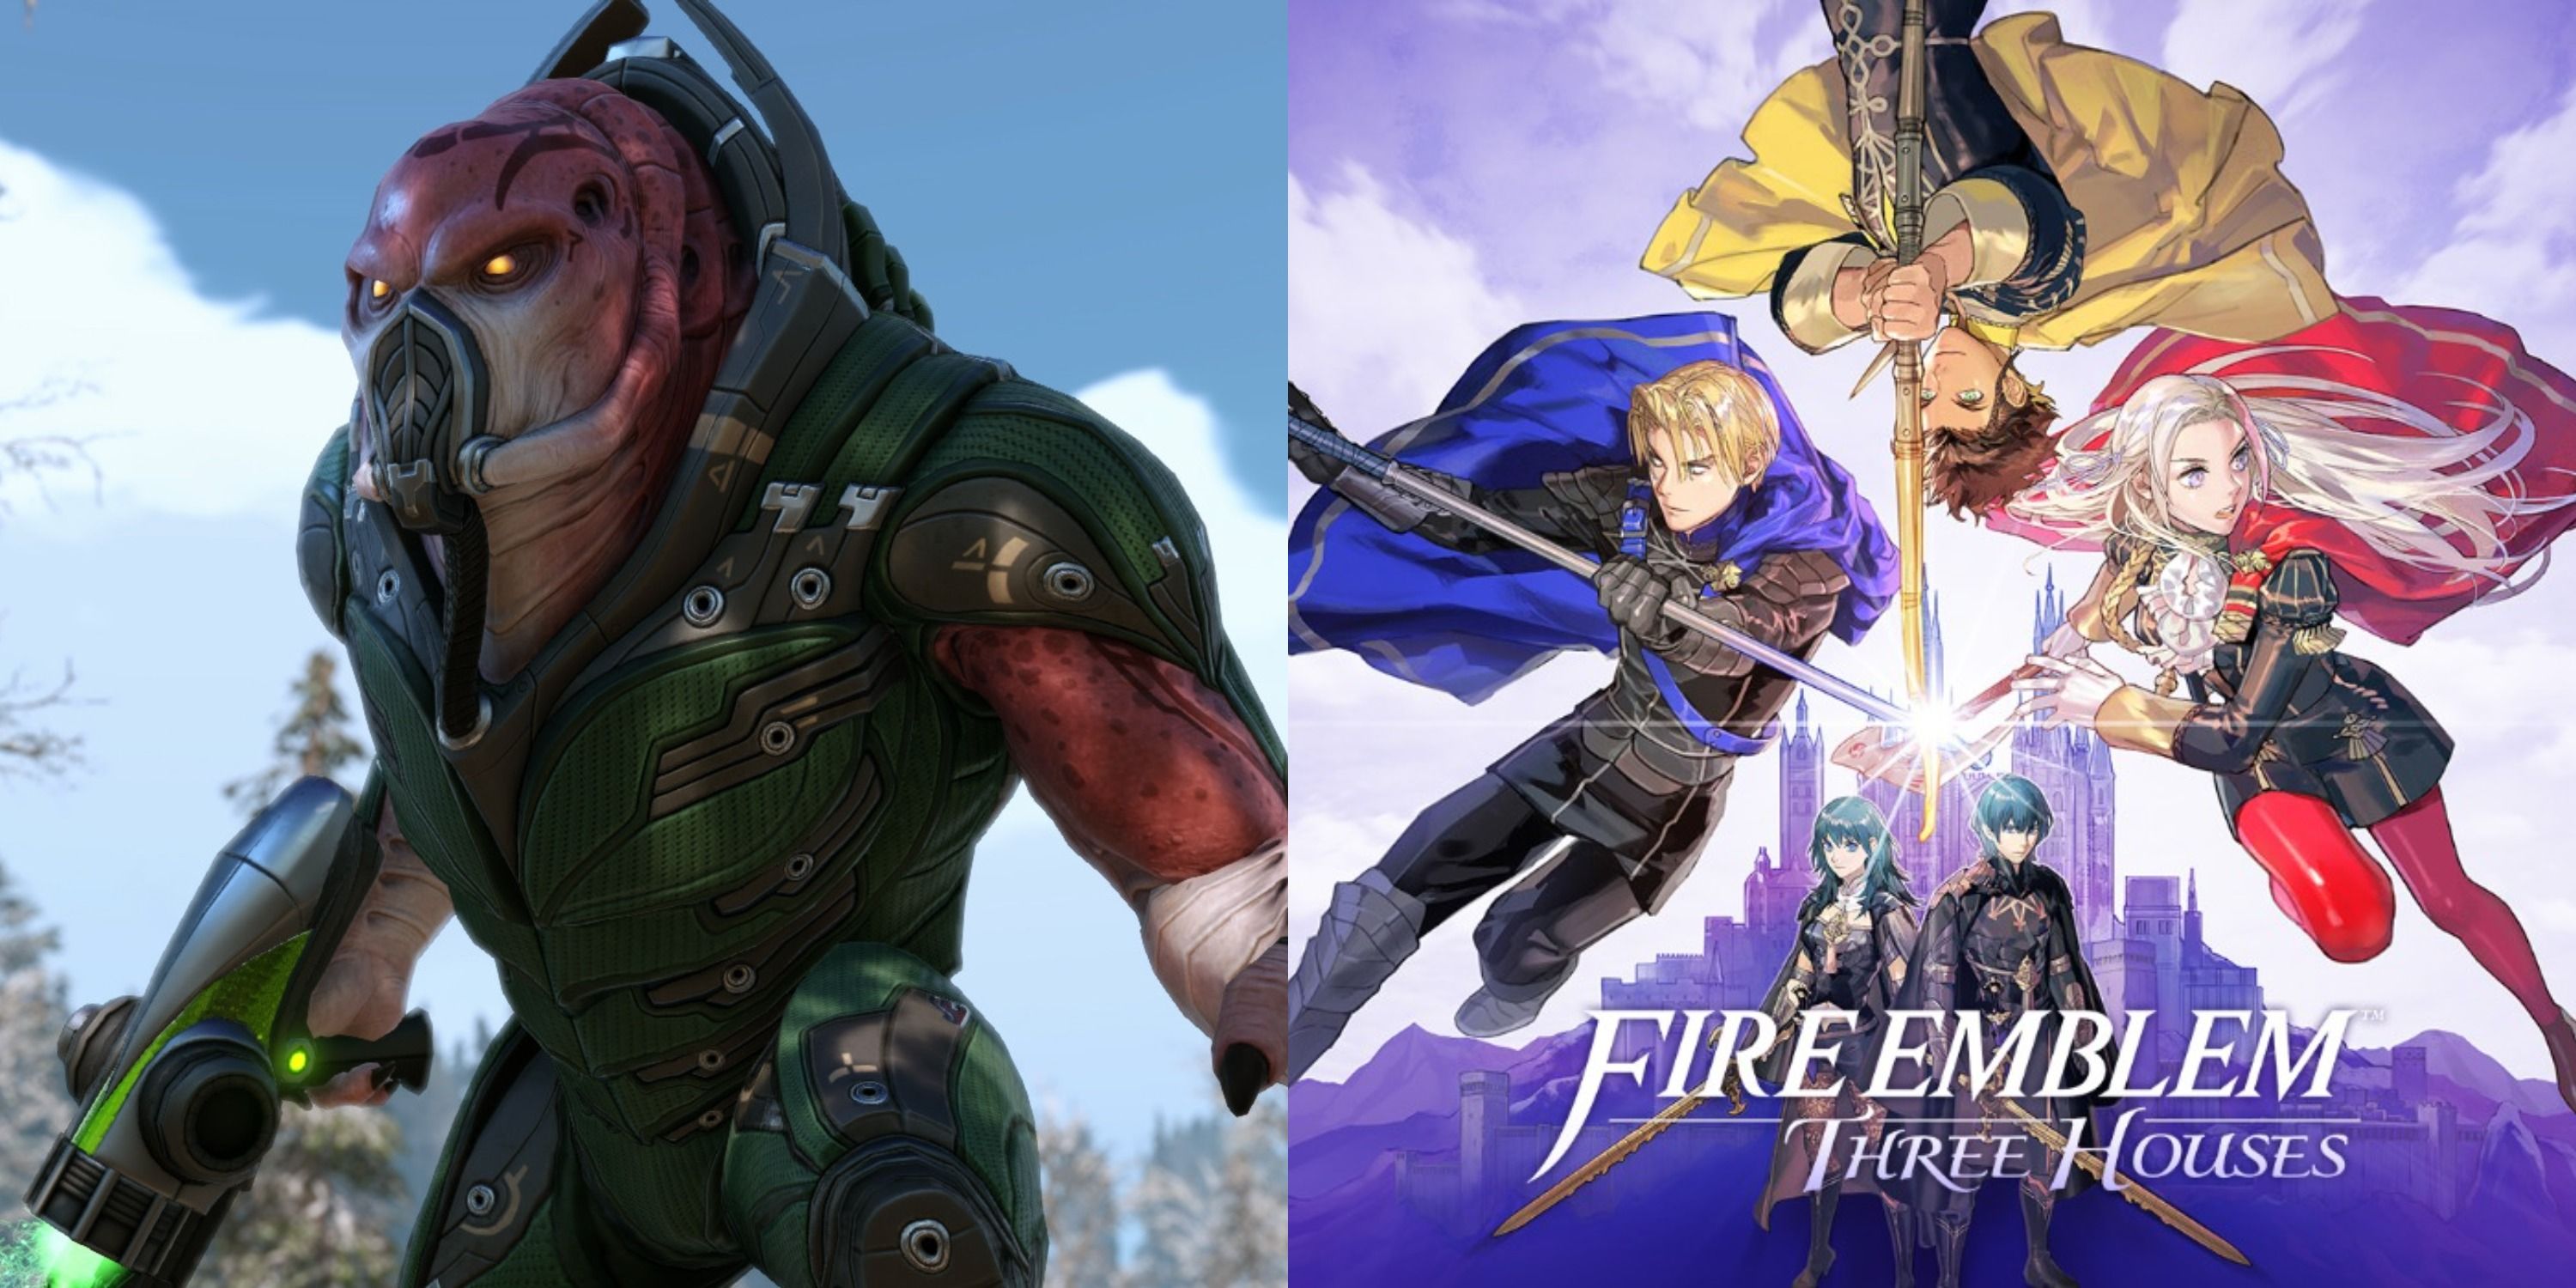 Featured image XCOM alien and cover art for Fire Emblem Three Houses